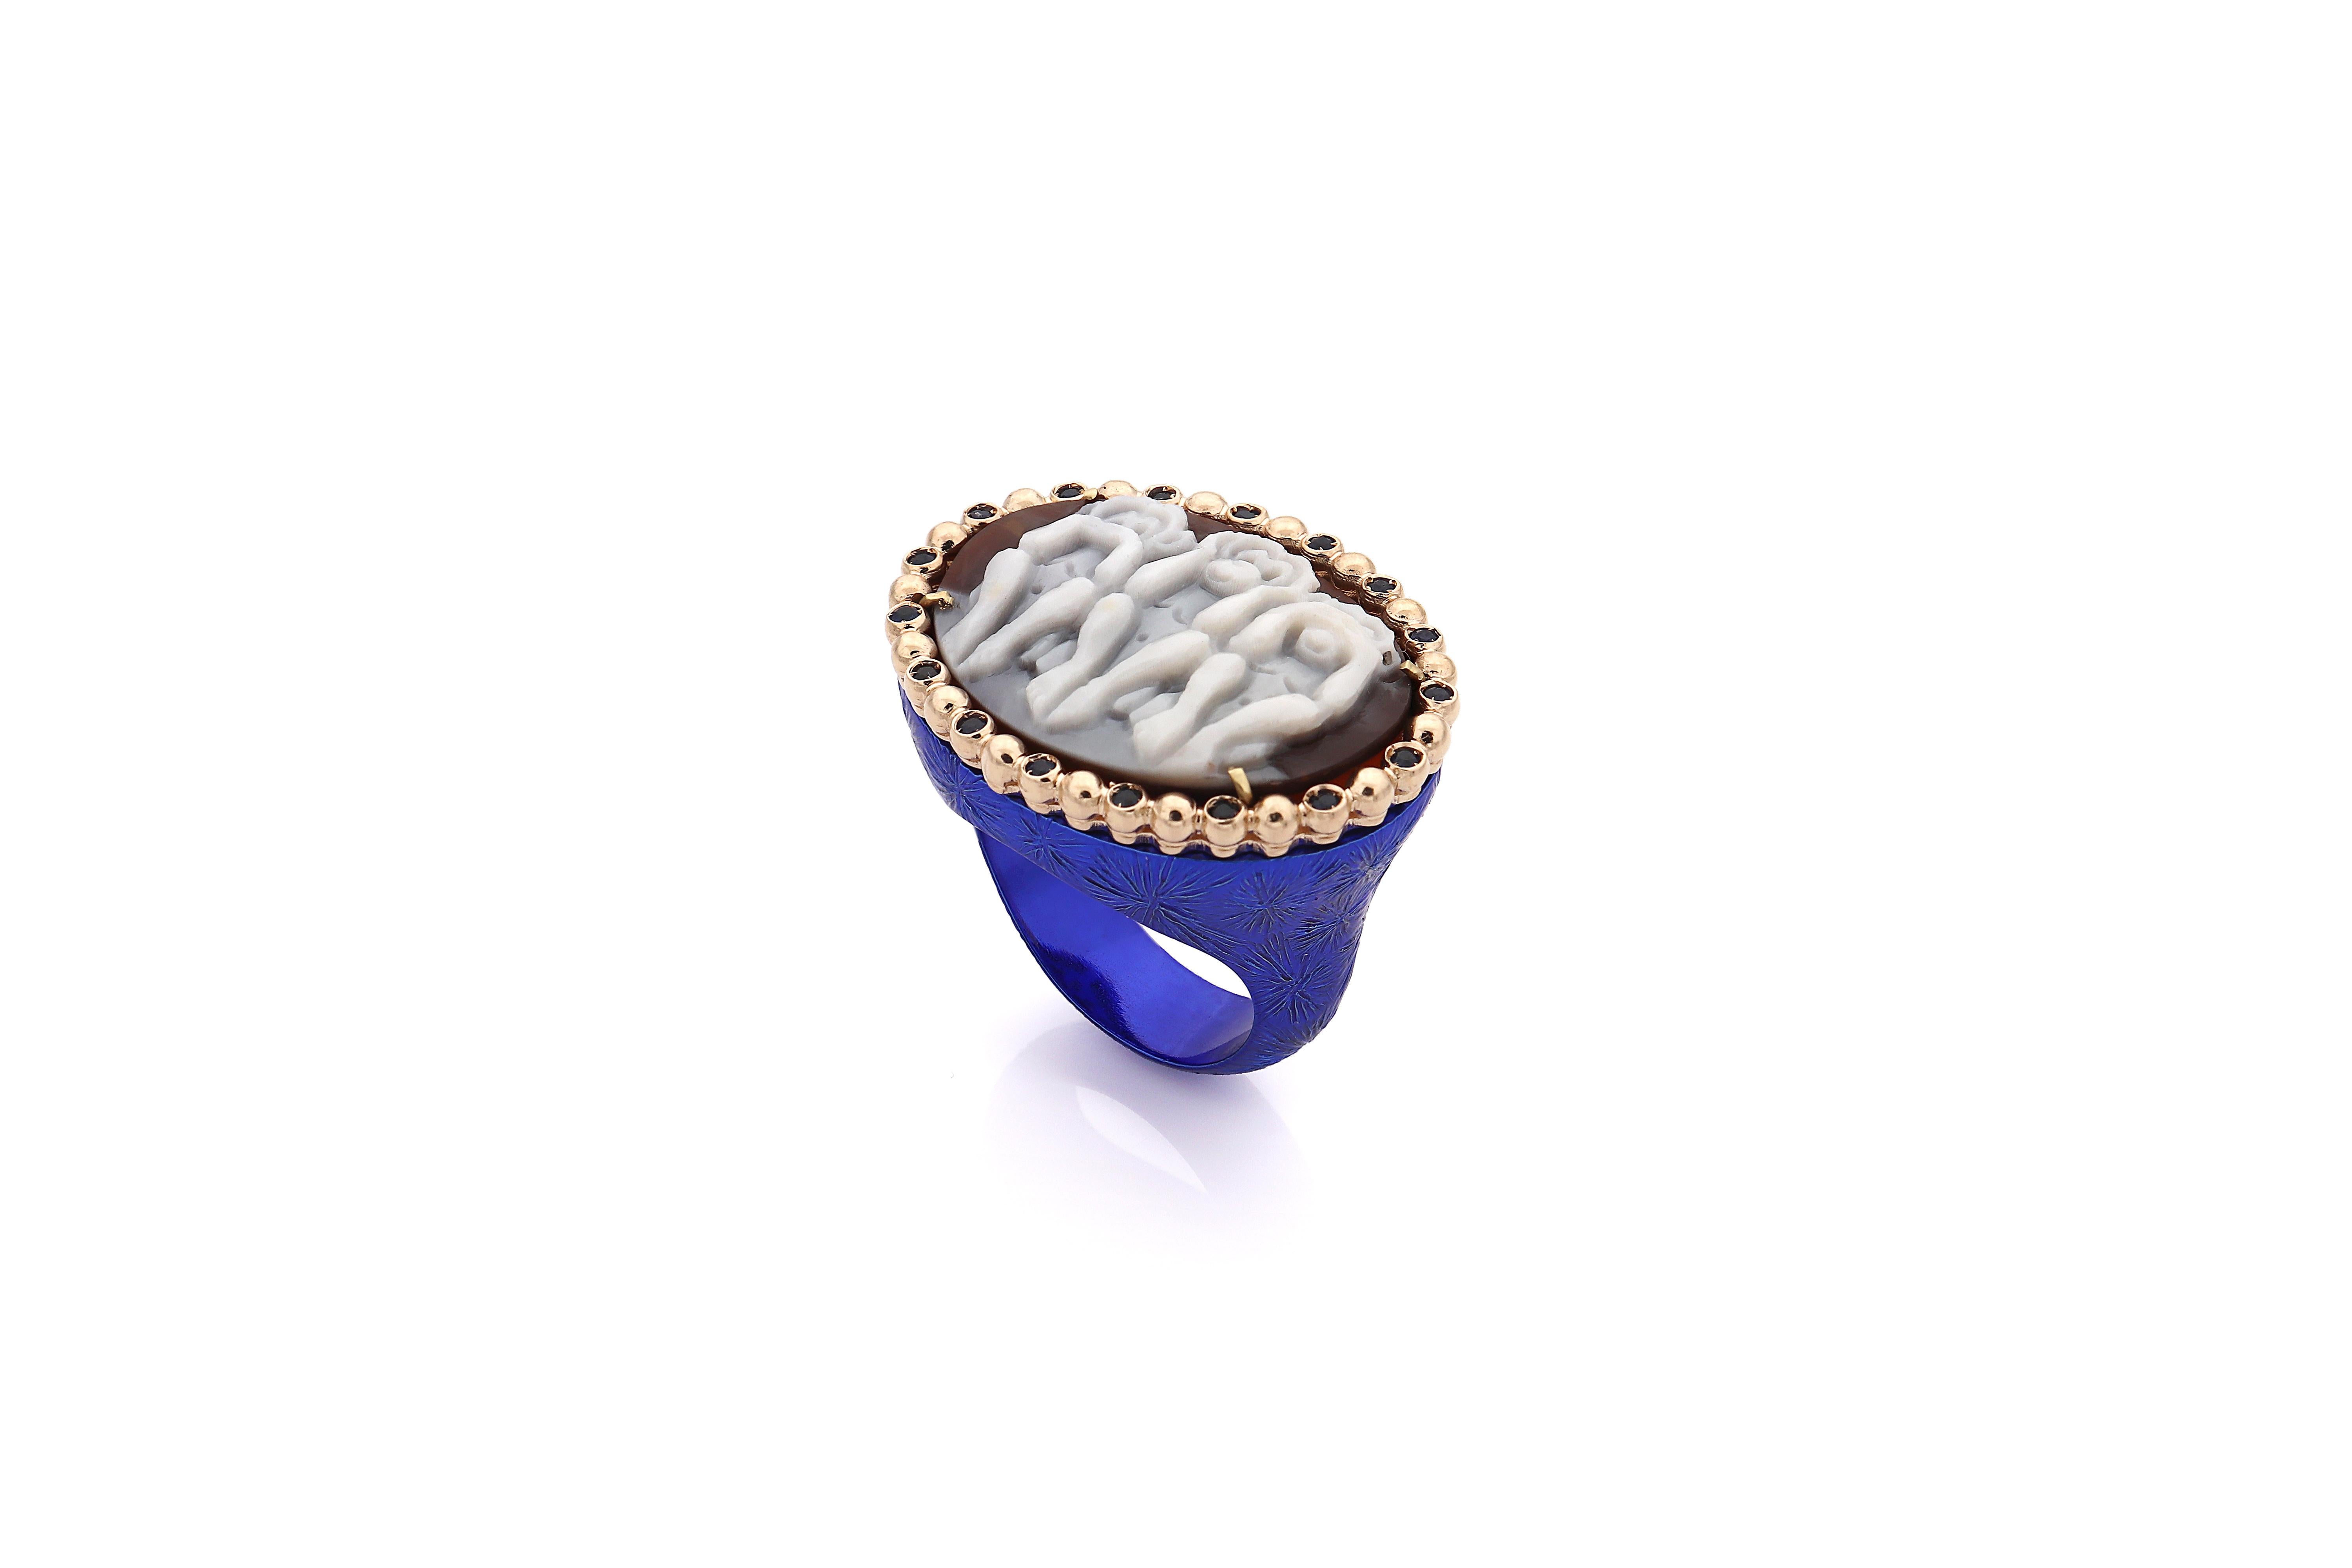 25mm sardonyx shell cameo hand-carved, on 9kt gold and sterling silver with ﻿0.20ct blue sapphires.

Comes in different colors, such as black and green, contact us for more details.